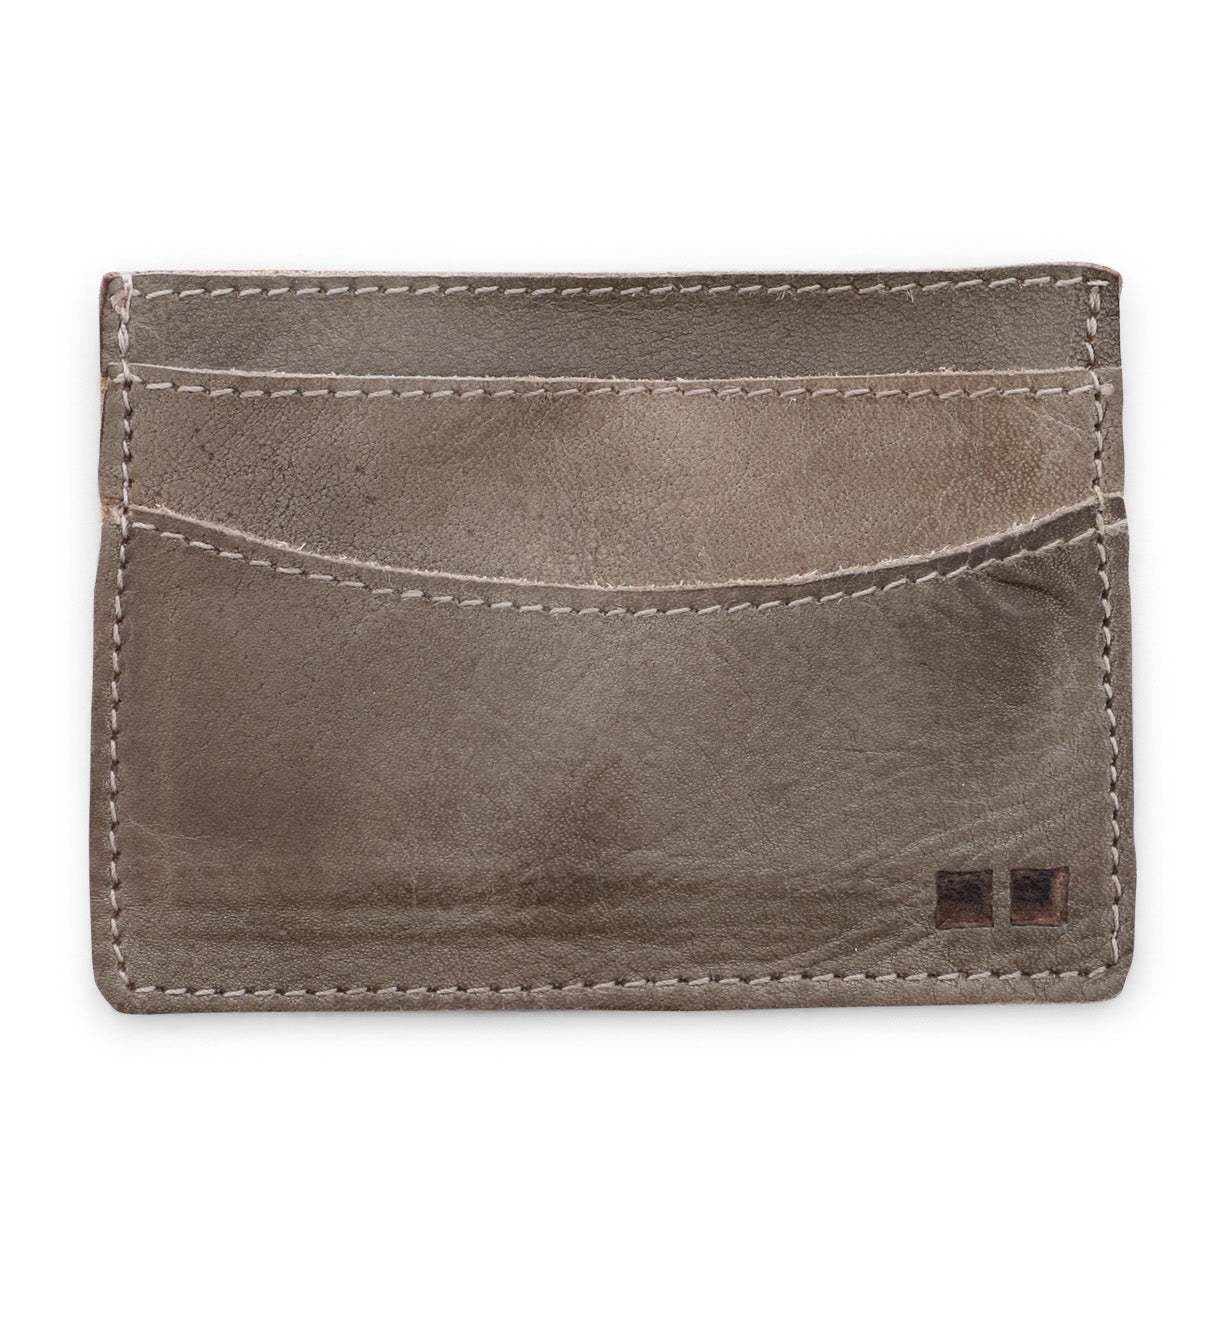 A brown leather Chuck card holder by Bed Stu on a white background.